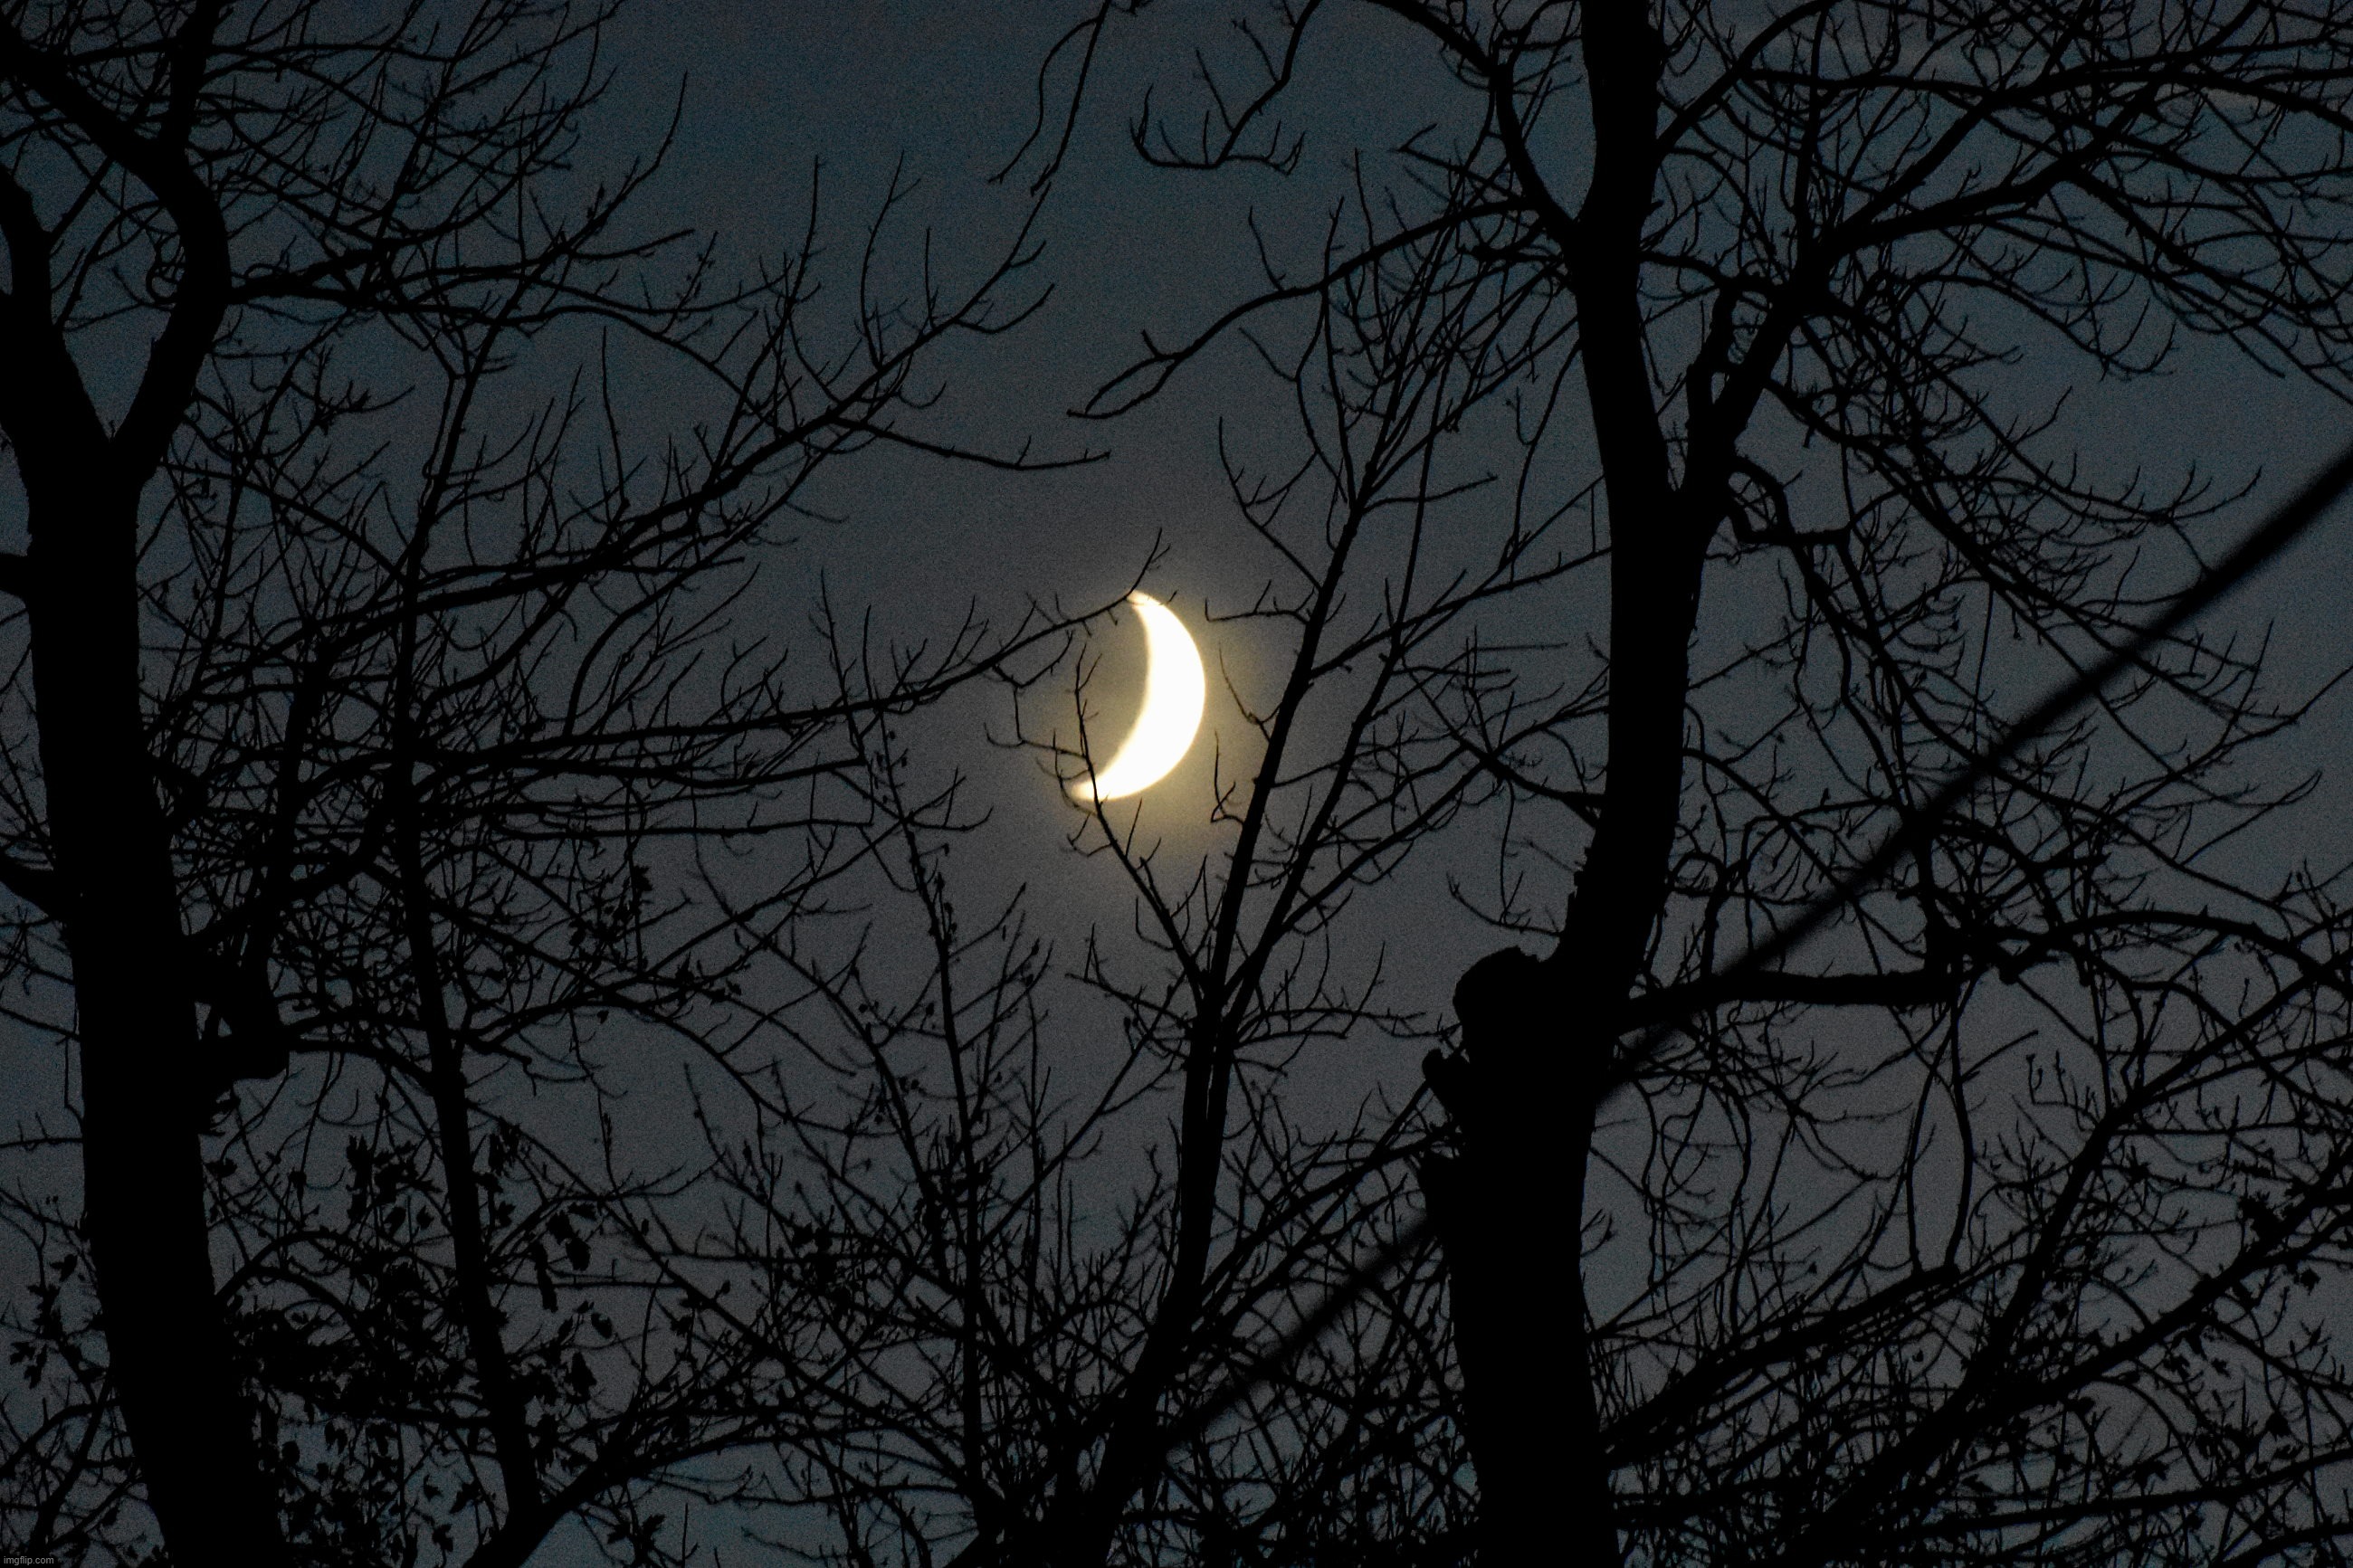 cresent moon through the trees | image tagged in cresent moon,nikon,kewlew | made w/ Imgflip meme maker